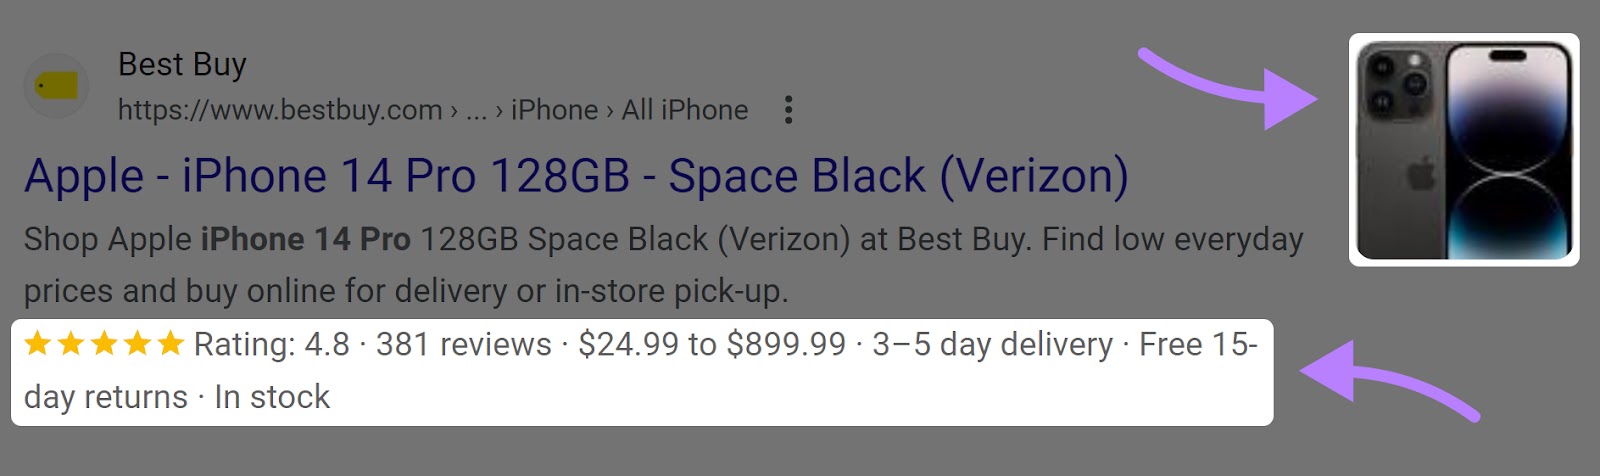 A product markup result on the SERP